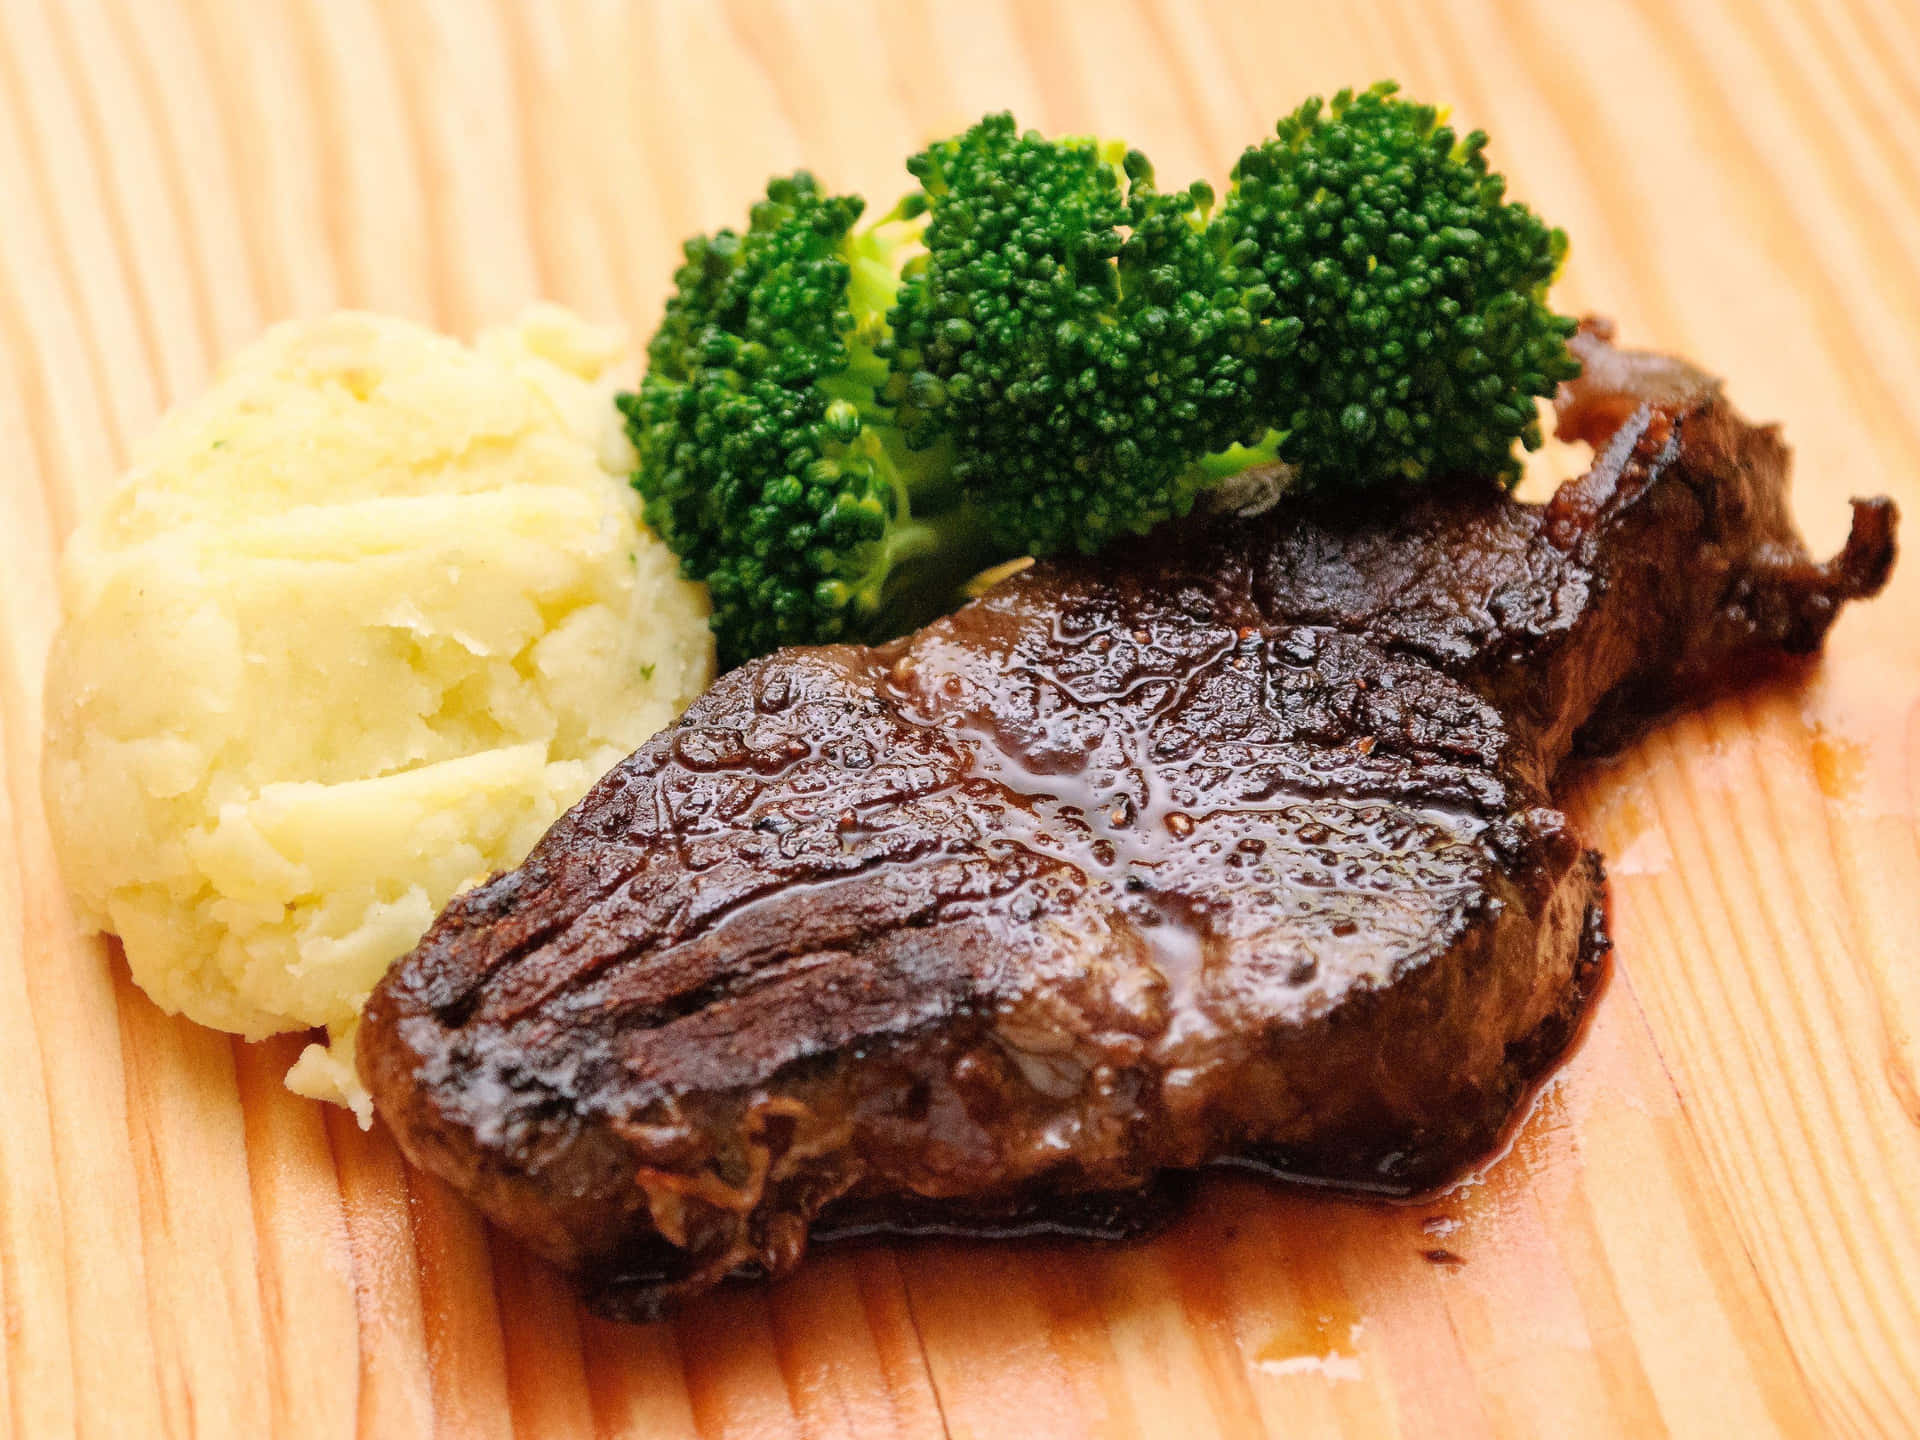 A Steak With Broccoli And Mashed Potatoes